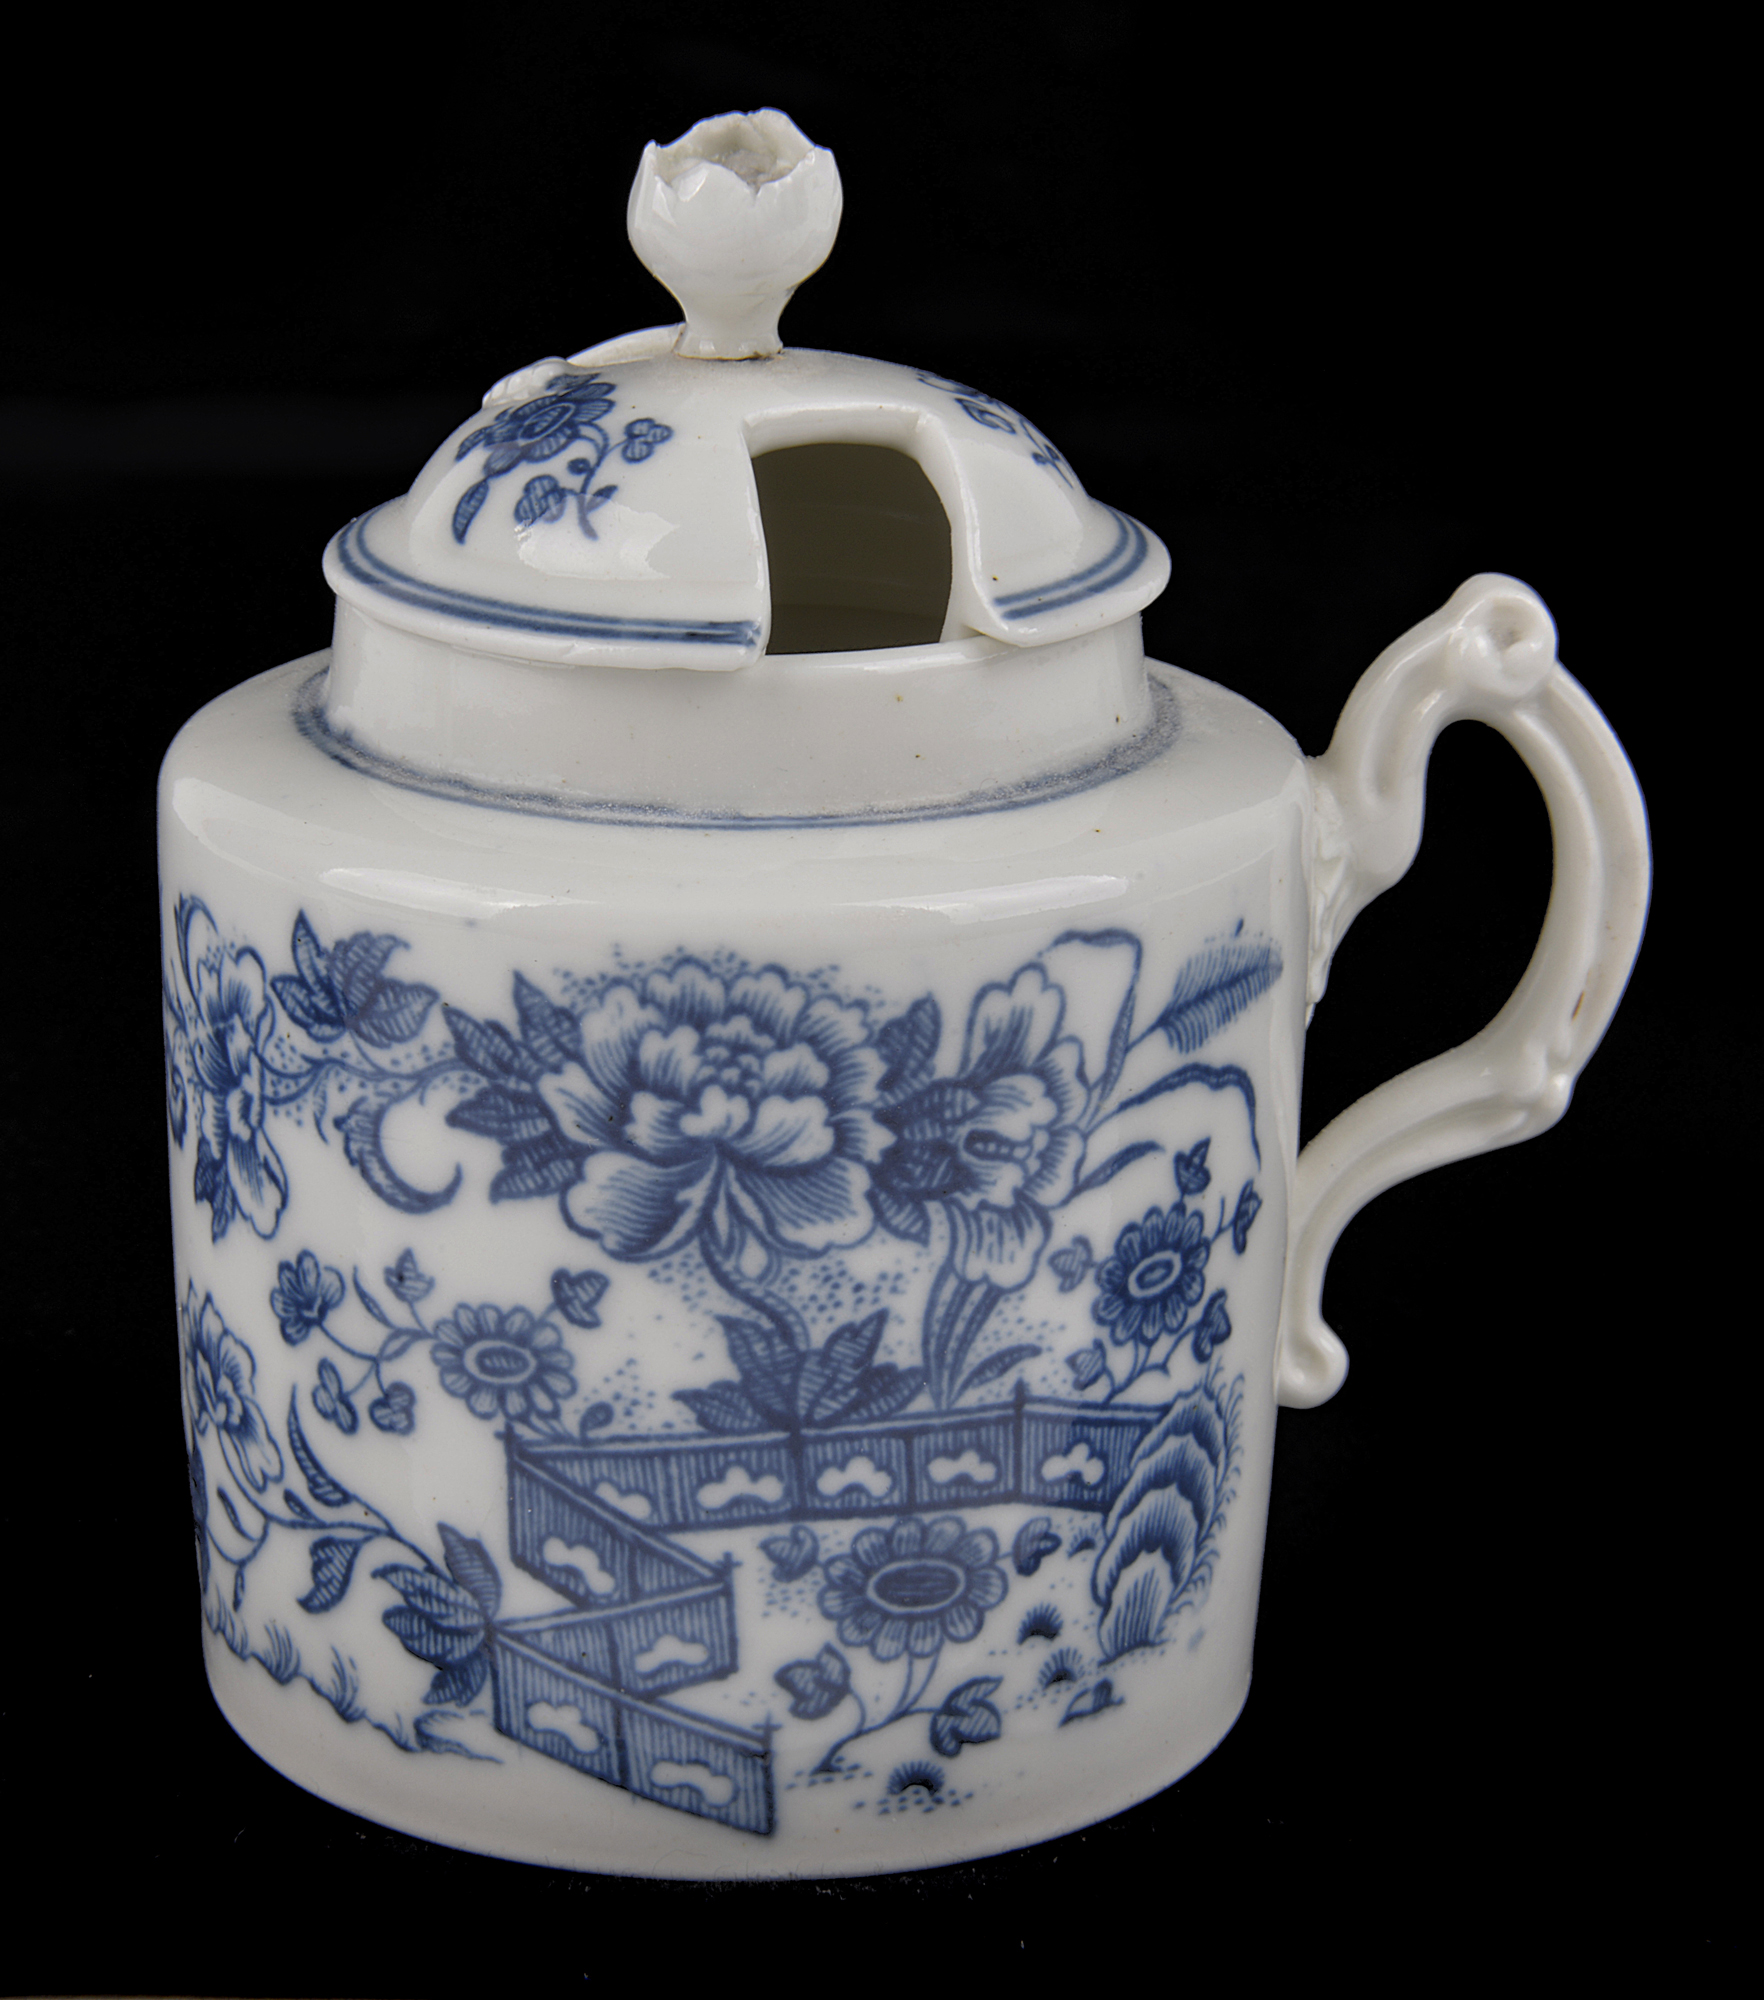 A Caughley porcelain mustard pot and cover, with rose finial and Chinese garden decoration, circa